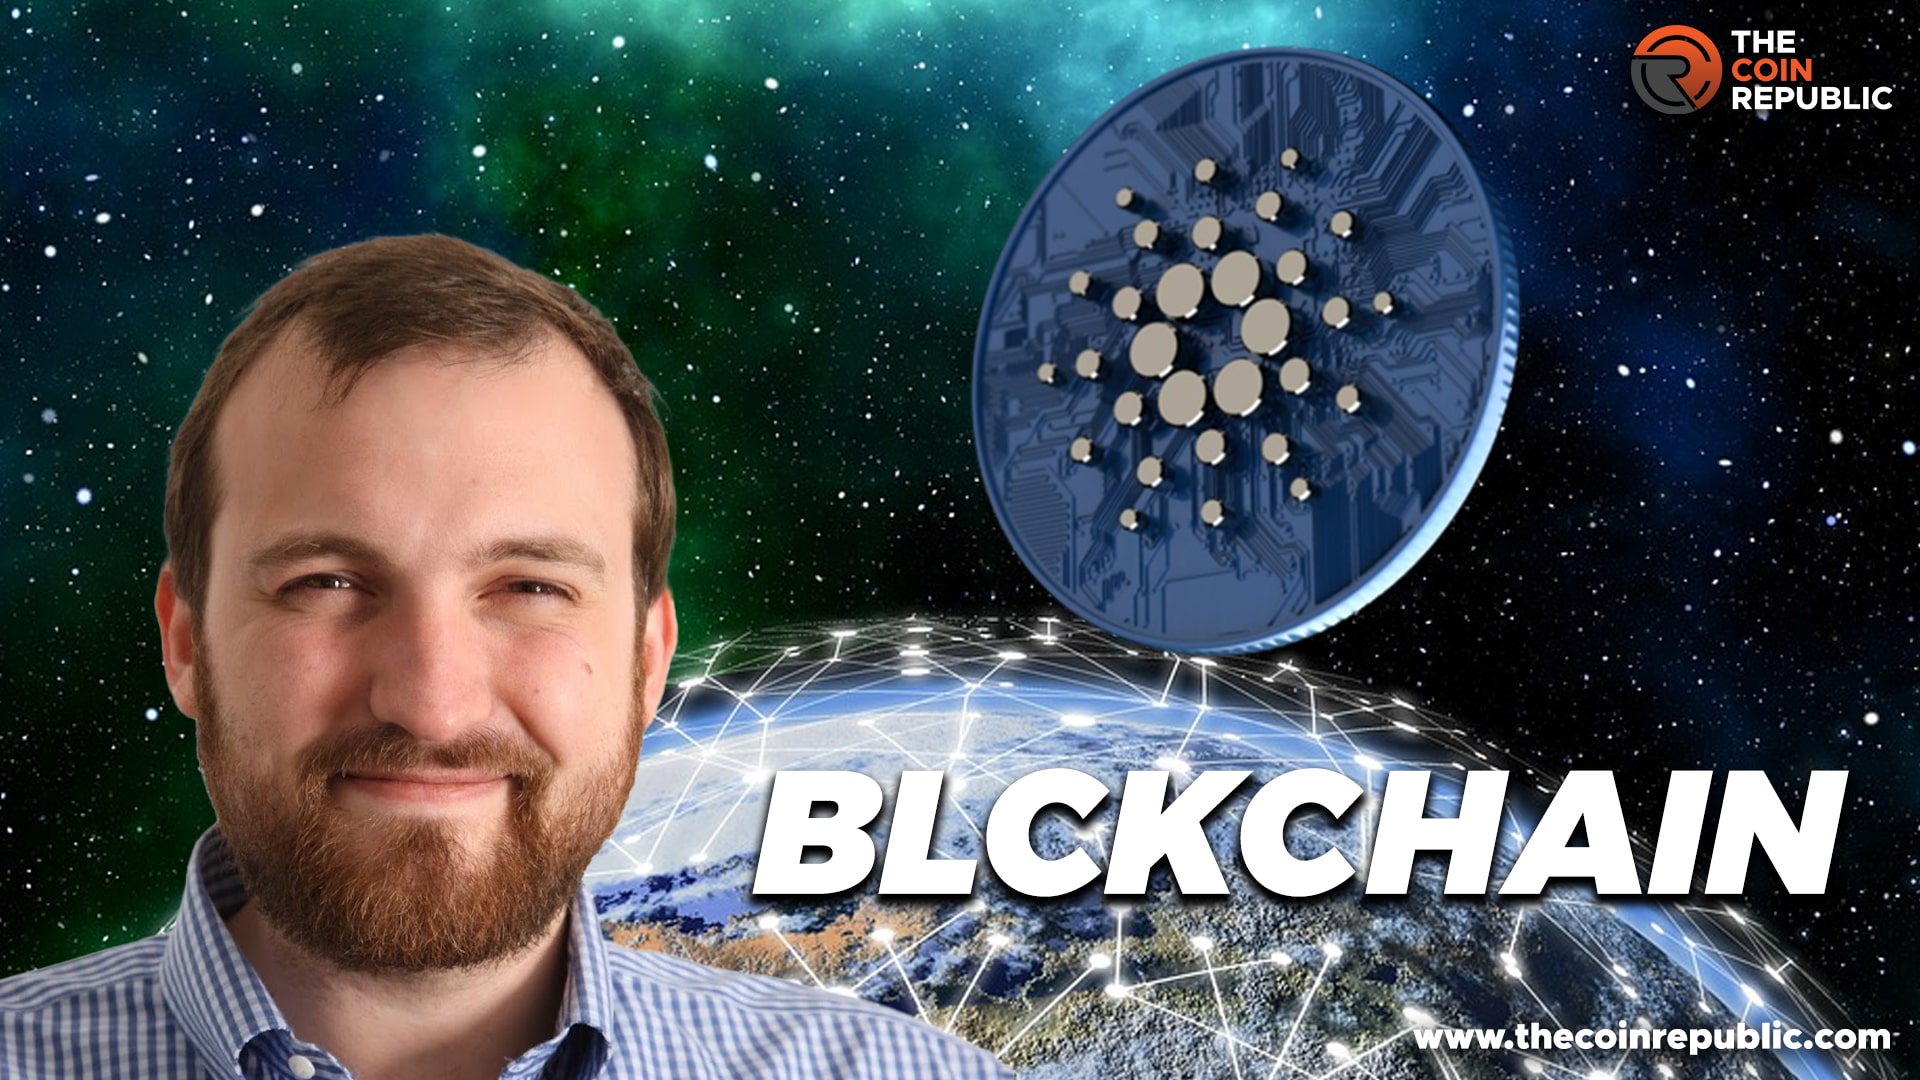 Charles Hoskinson Speaks on One Other Thing That Might Benefit Blockchain